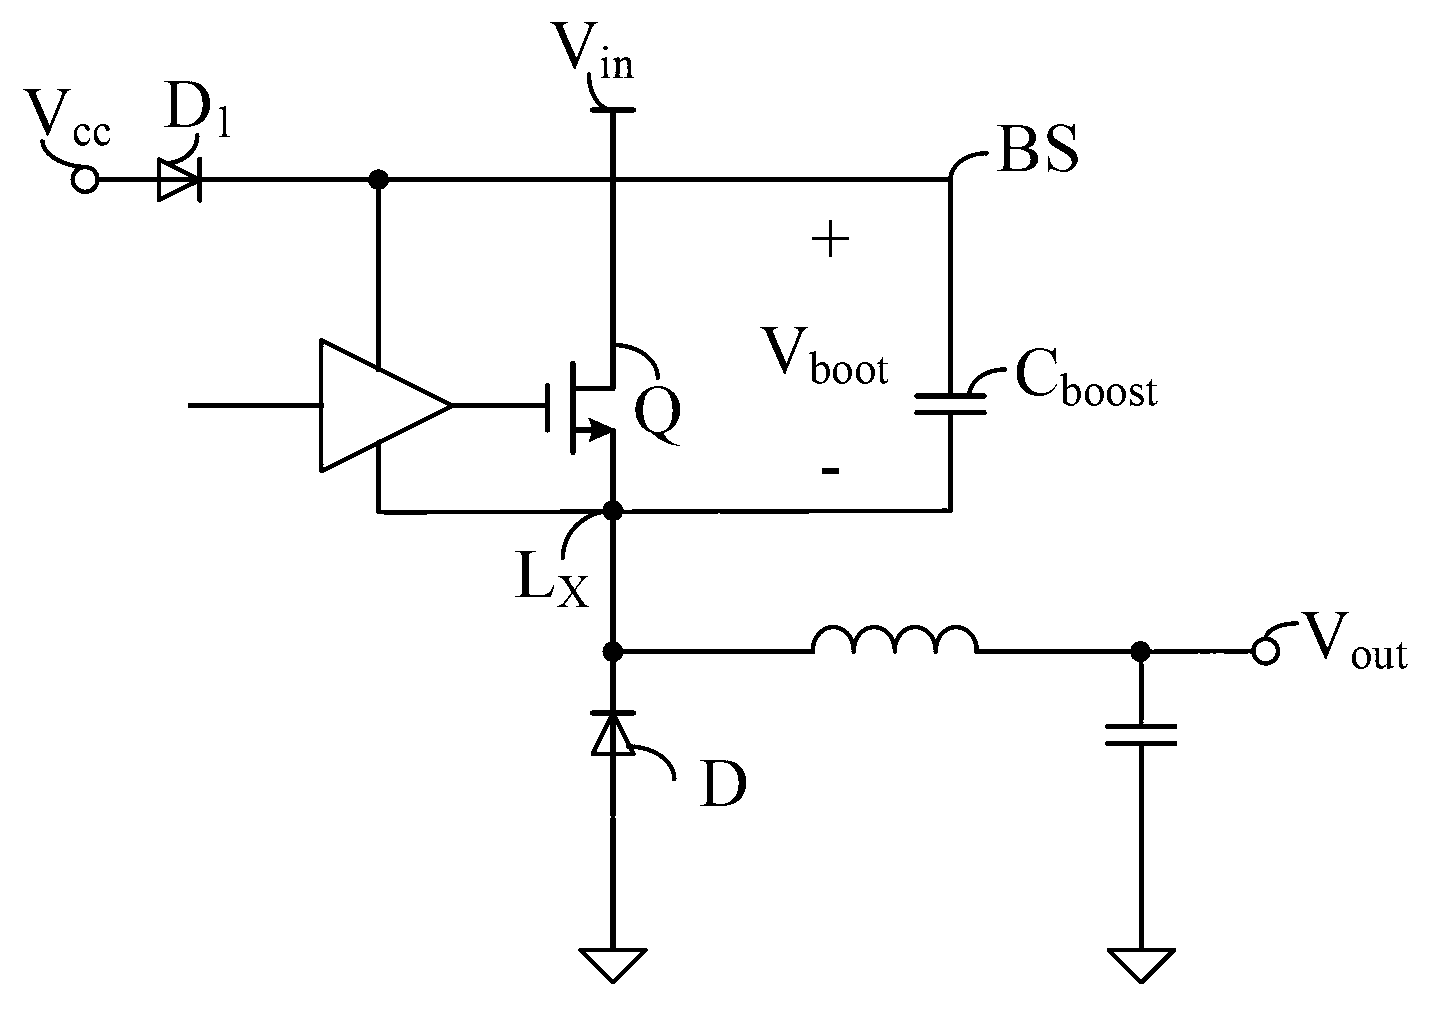 Bootstrap capacitor power failure restoring circuit and switch power source circuit